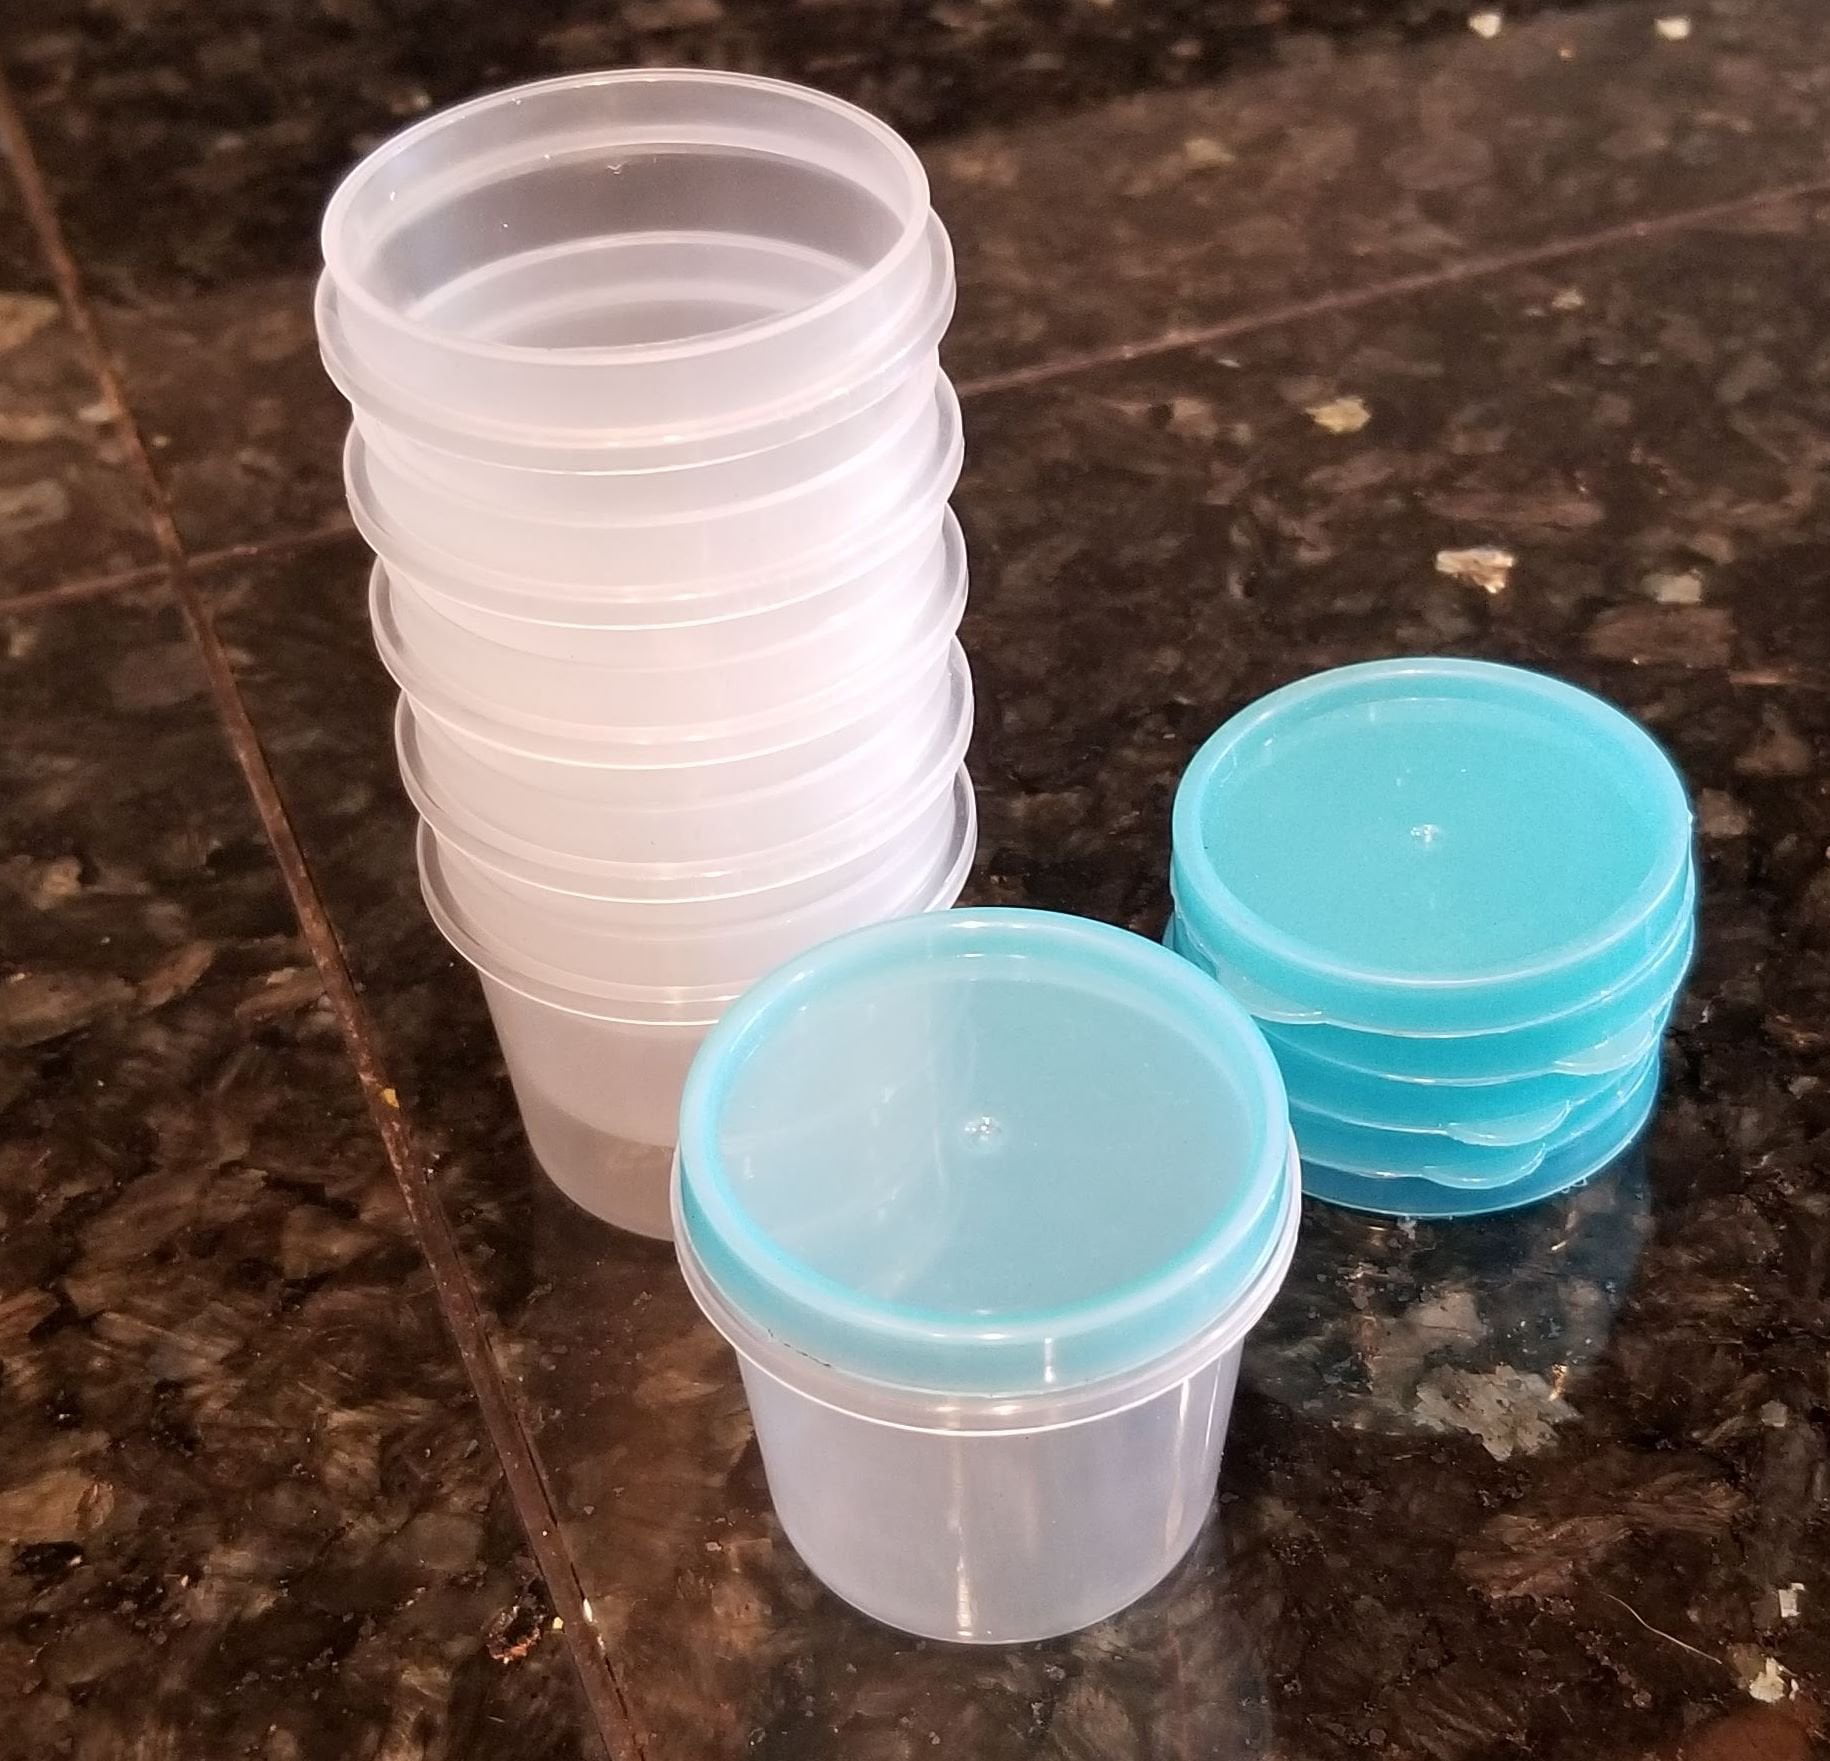 72 Pieces of 1 Oz. Salad Dressing Containers Set